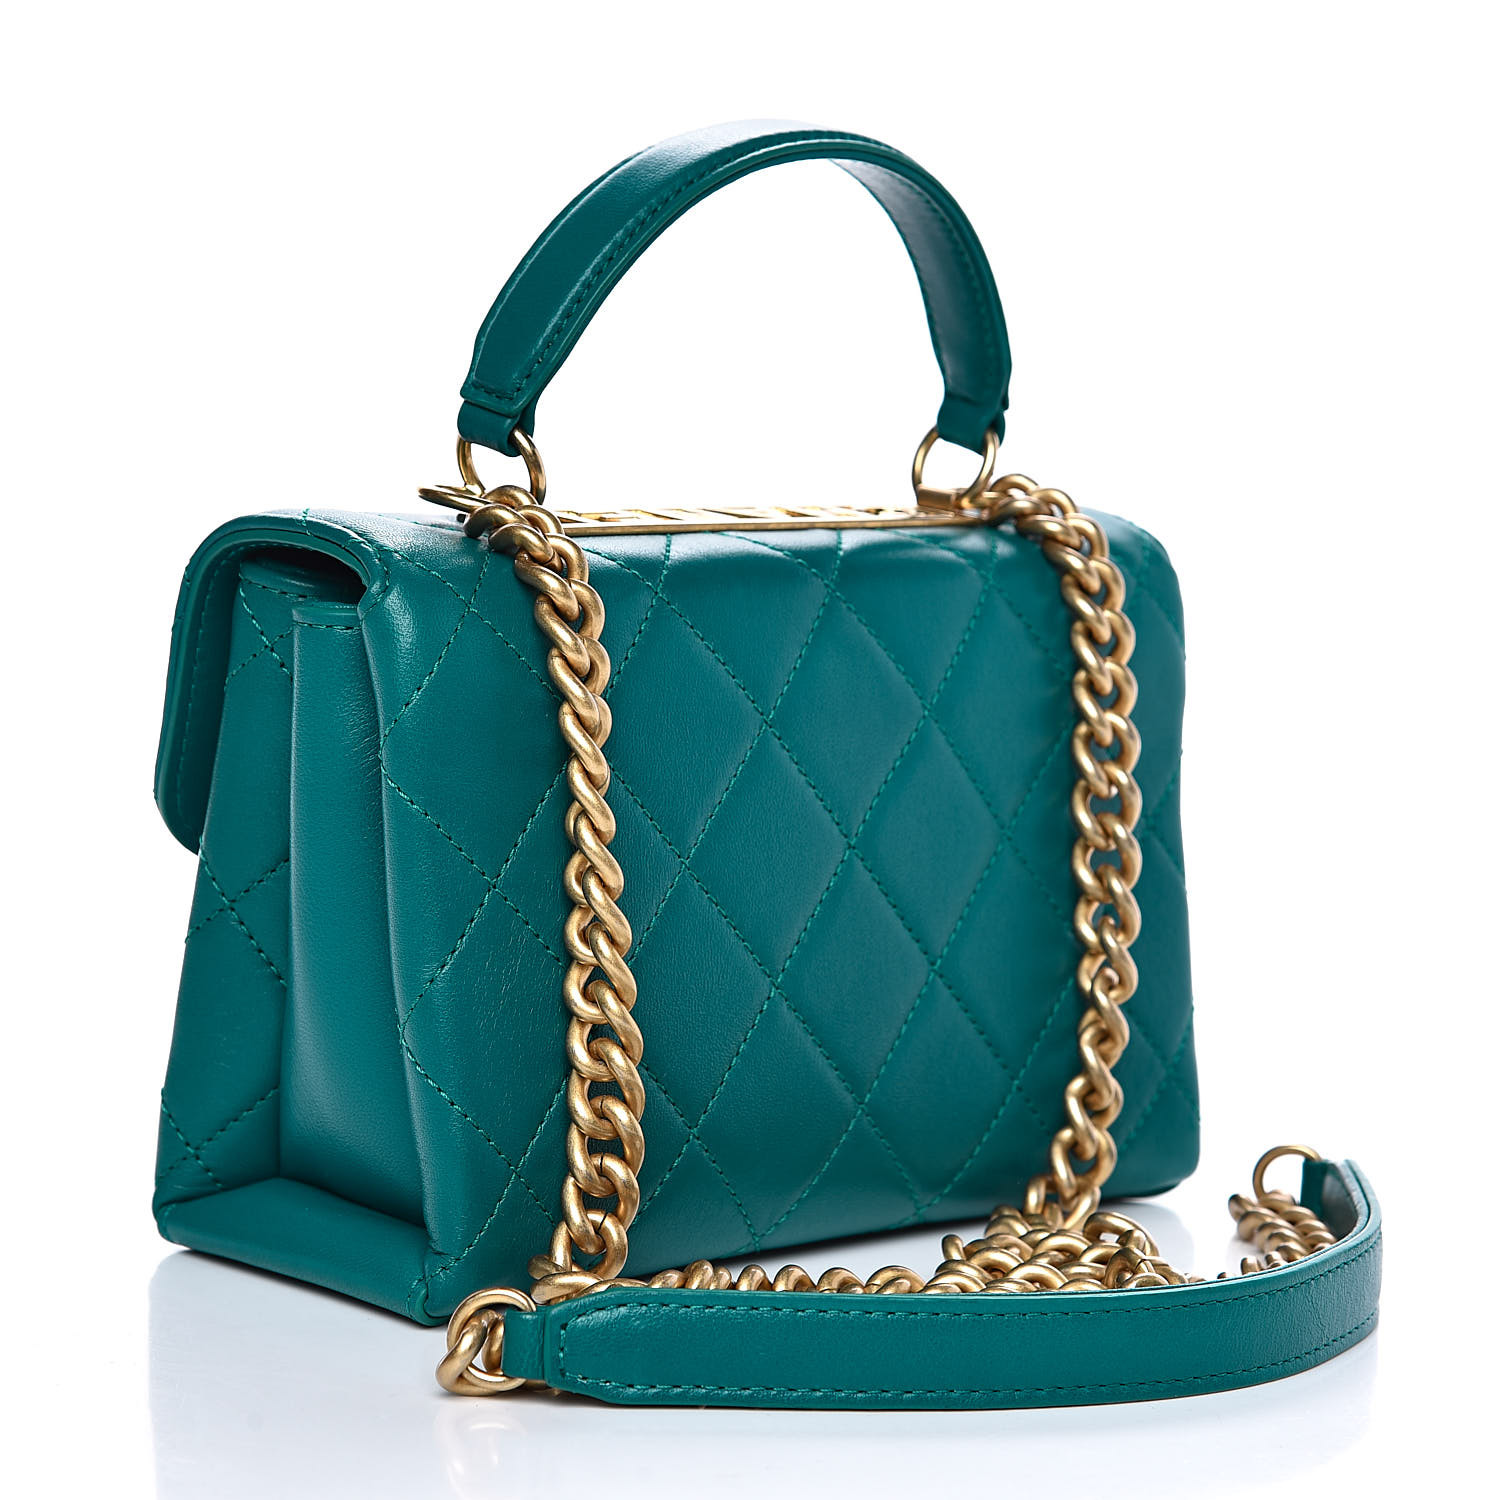 CHANEL Lambskin Quilted Small Top Handle Bag Turquoise 533349